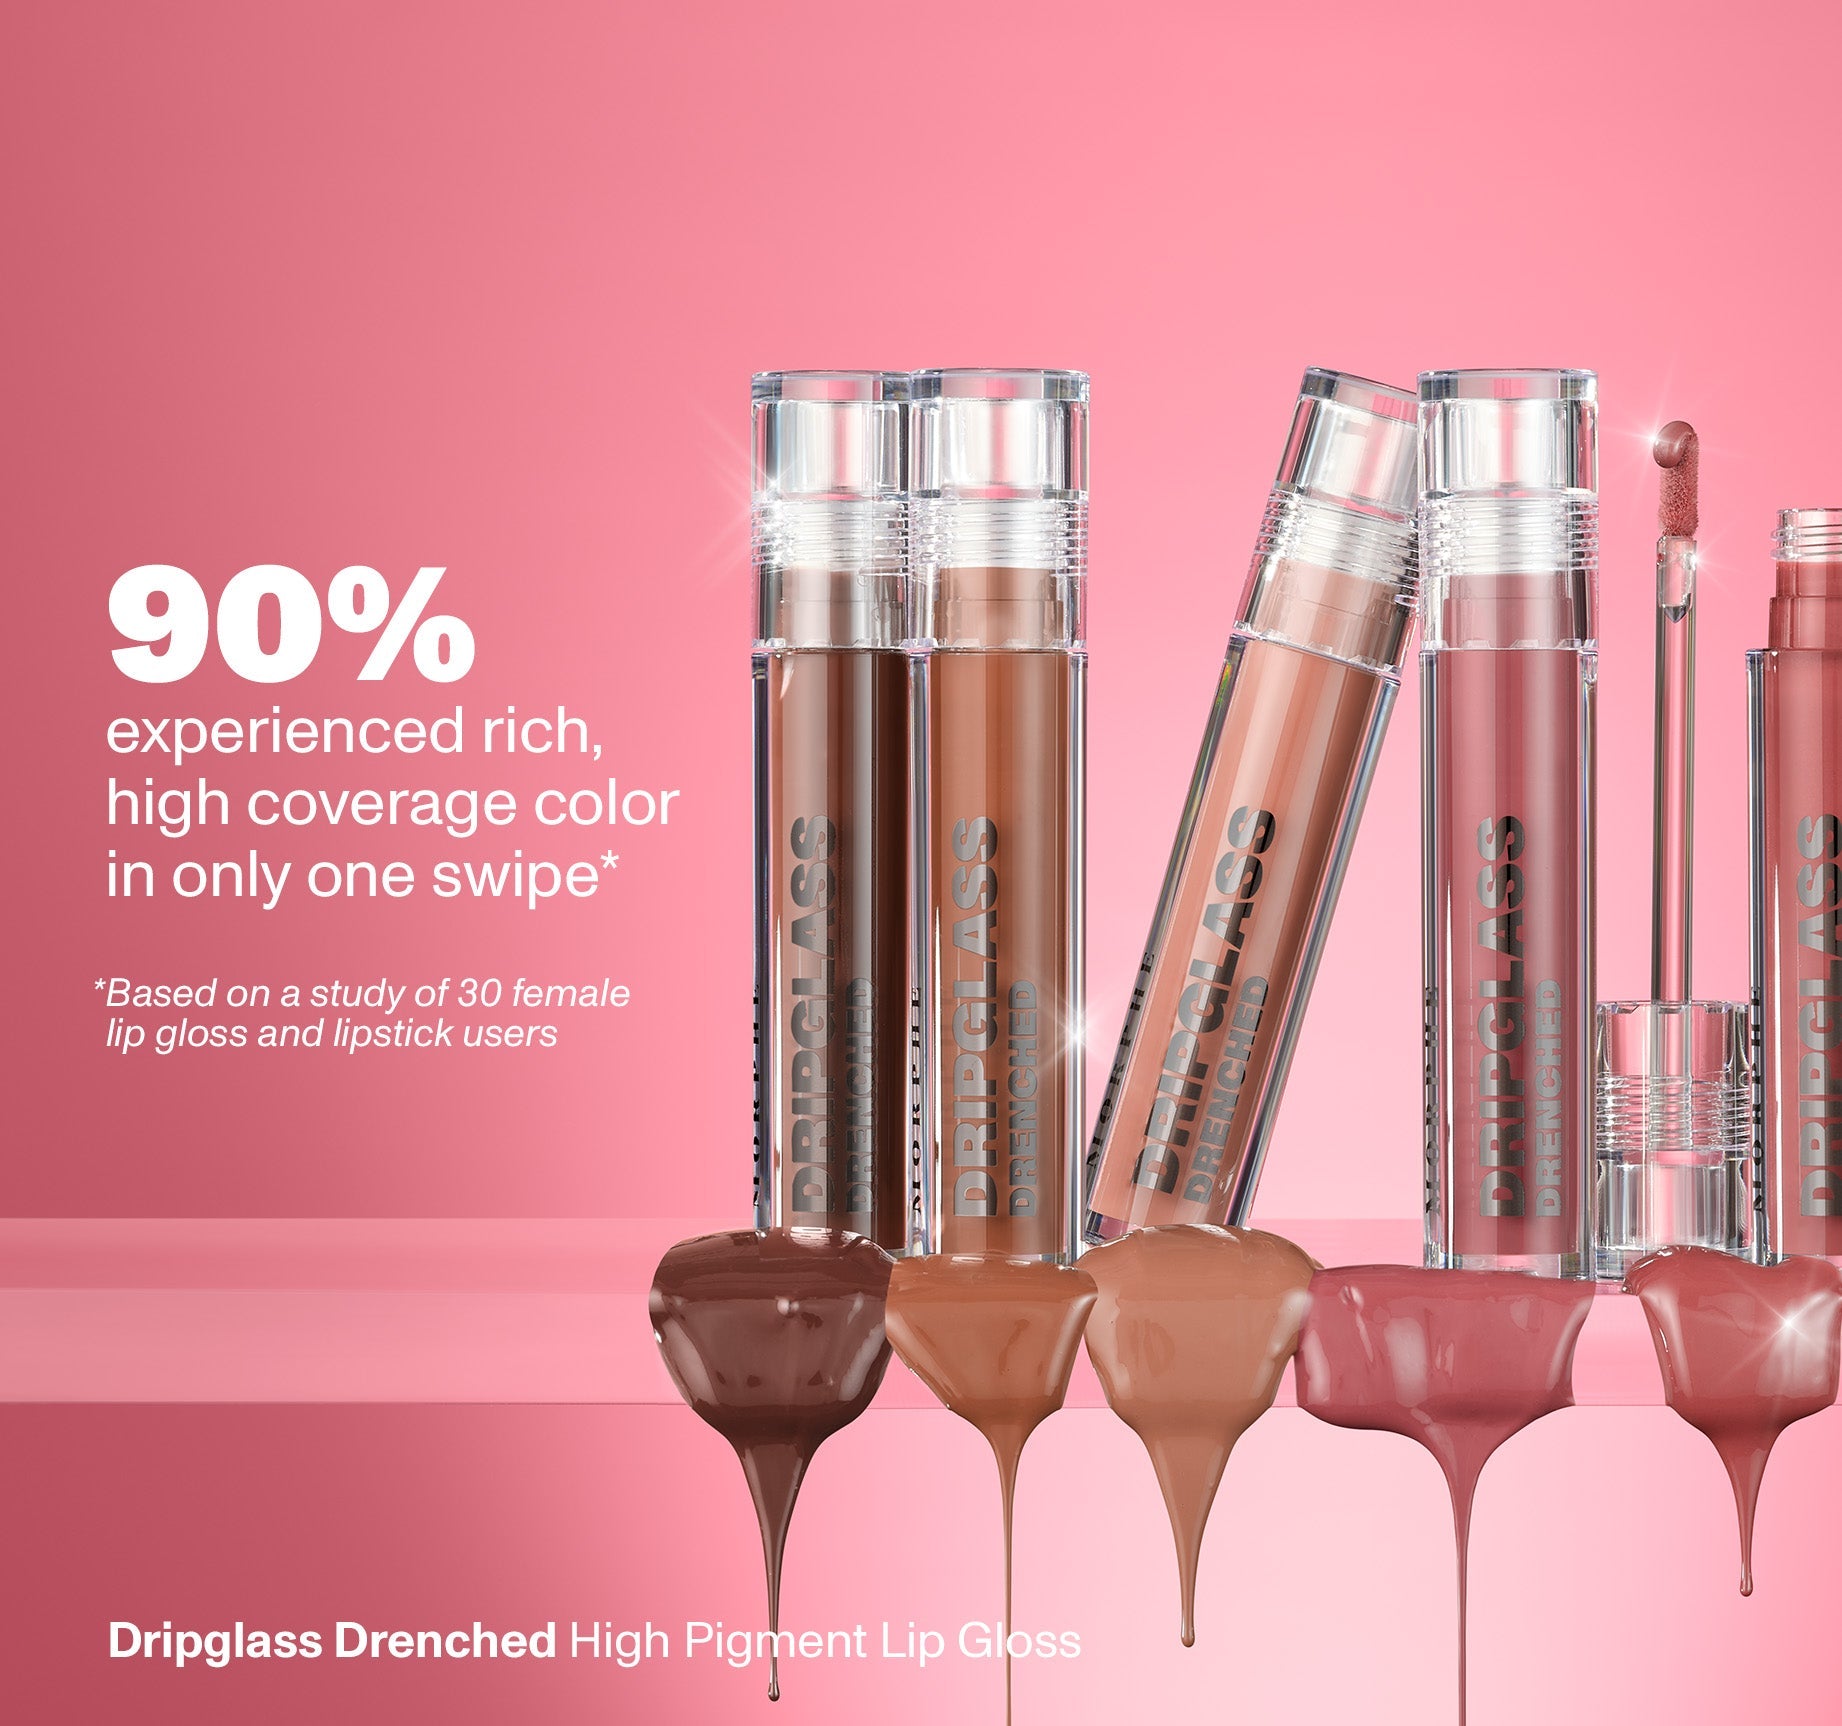 Dripglass Drenched High Pigment Lip Gloss - Naked Dip - Image 8